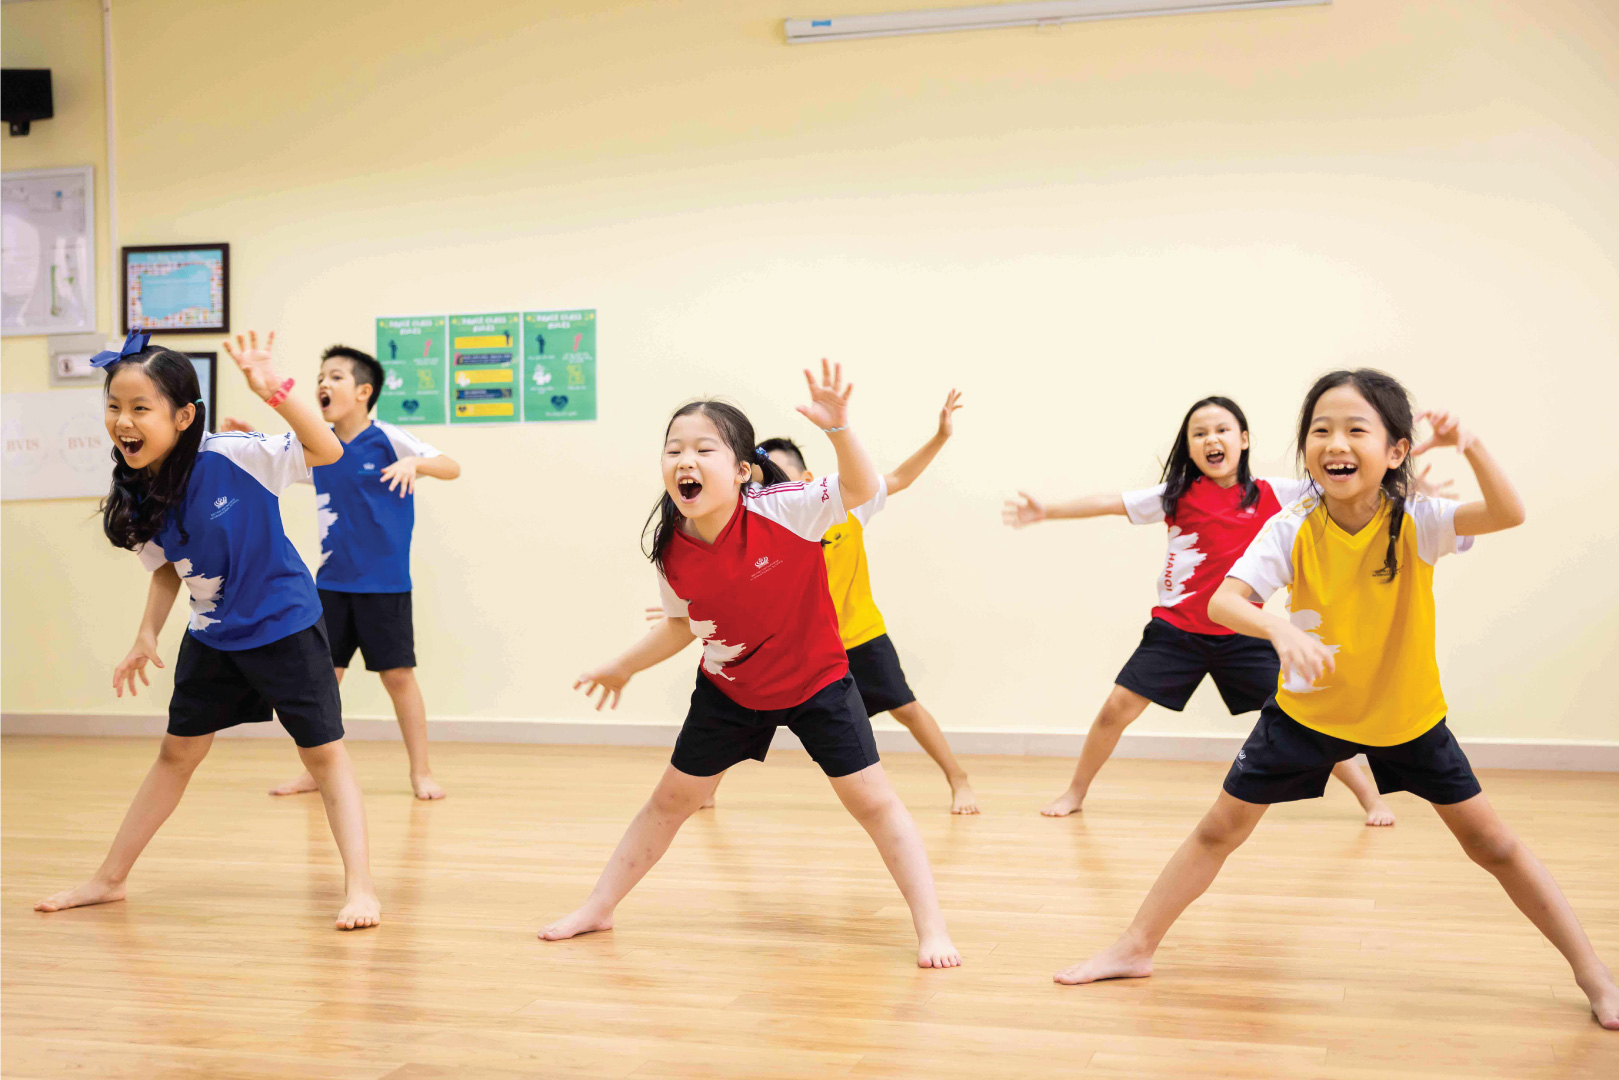 10 GOOD REASONS TO BE IN PRIMARY | BVIS Hanoi - 10 good things about Primary at BVIS Hanoi